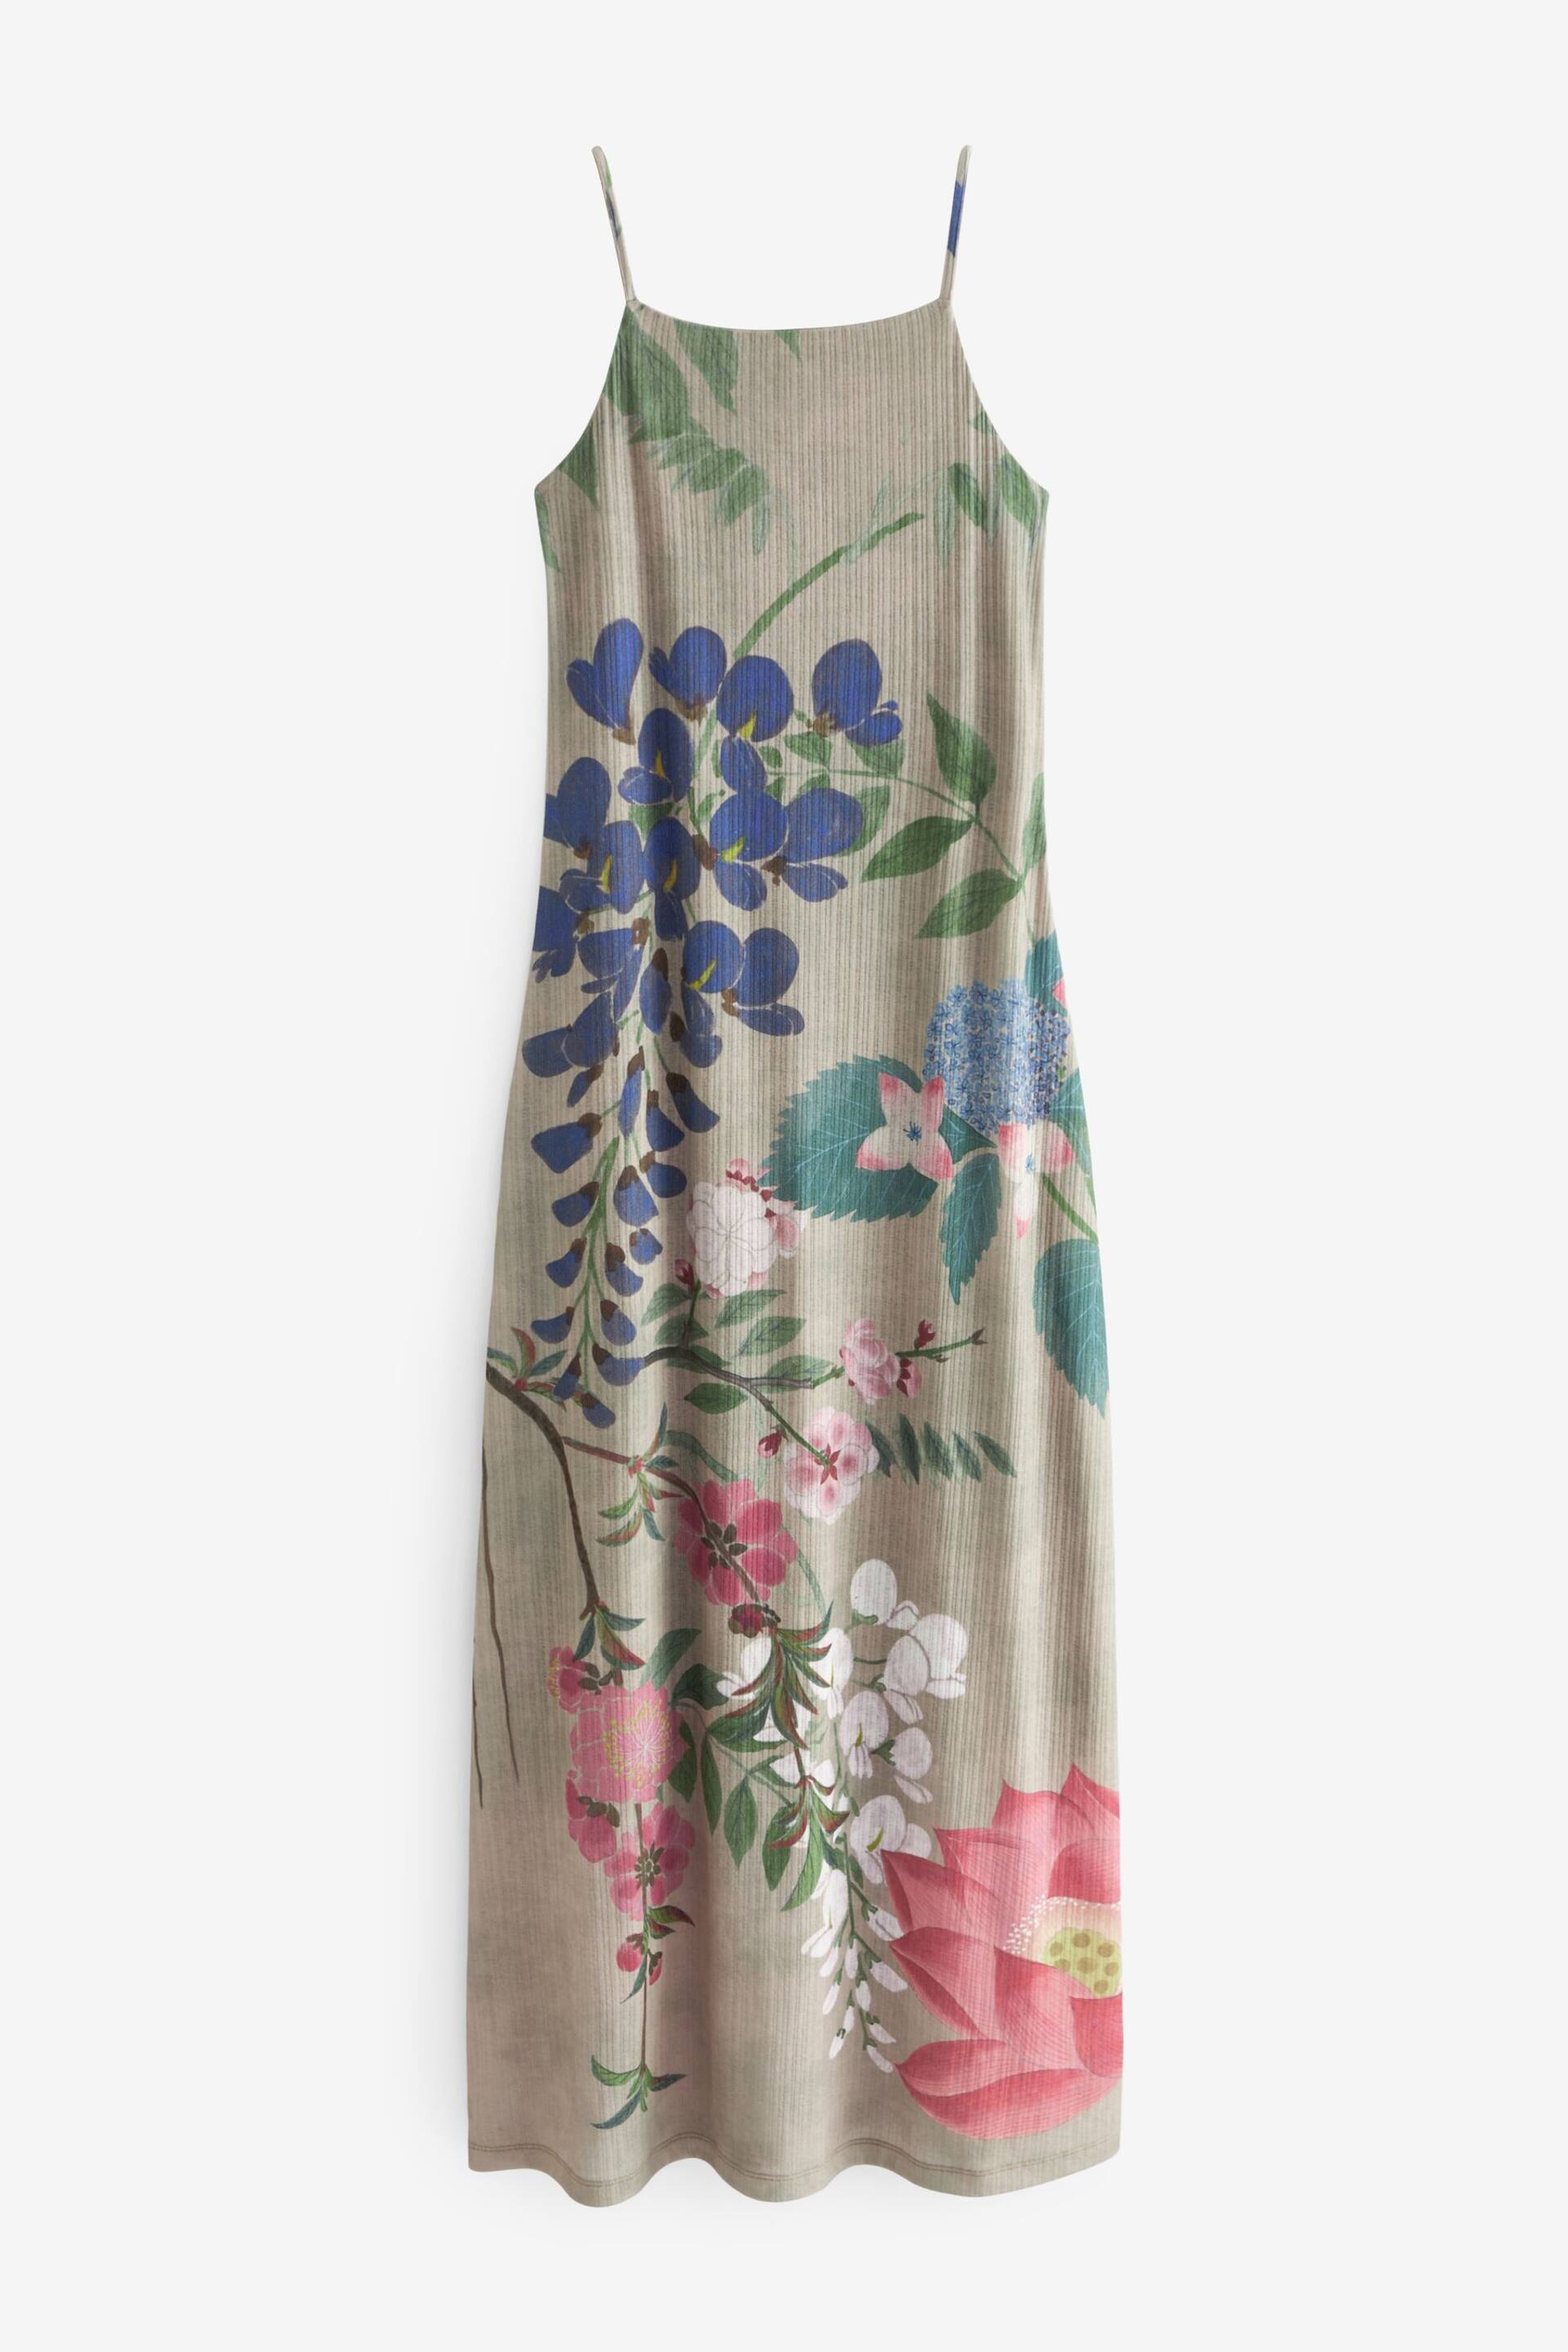 Neutral Floral Kew Collection Strappy Slip Dress - Image 6 of 7